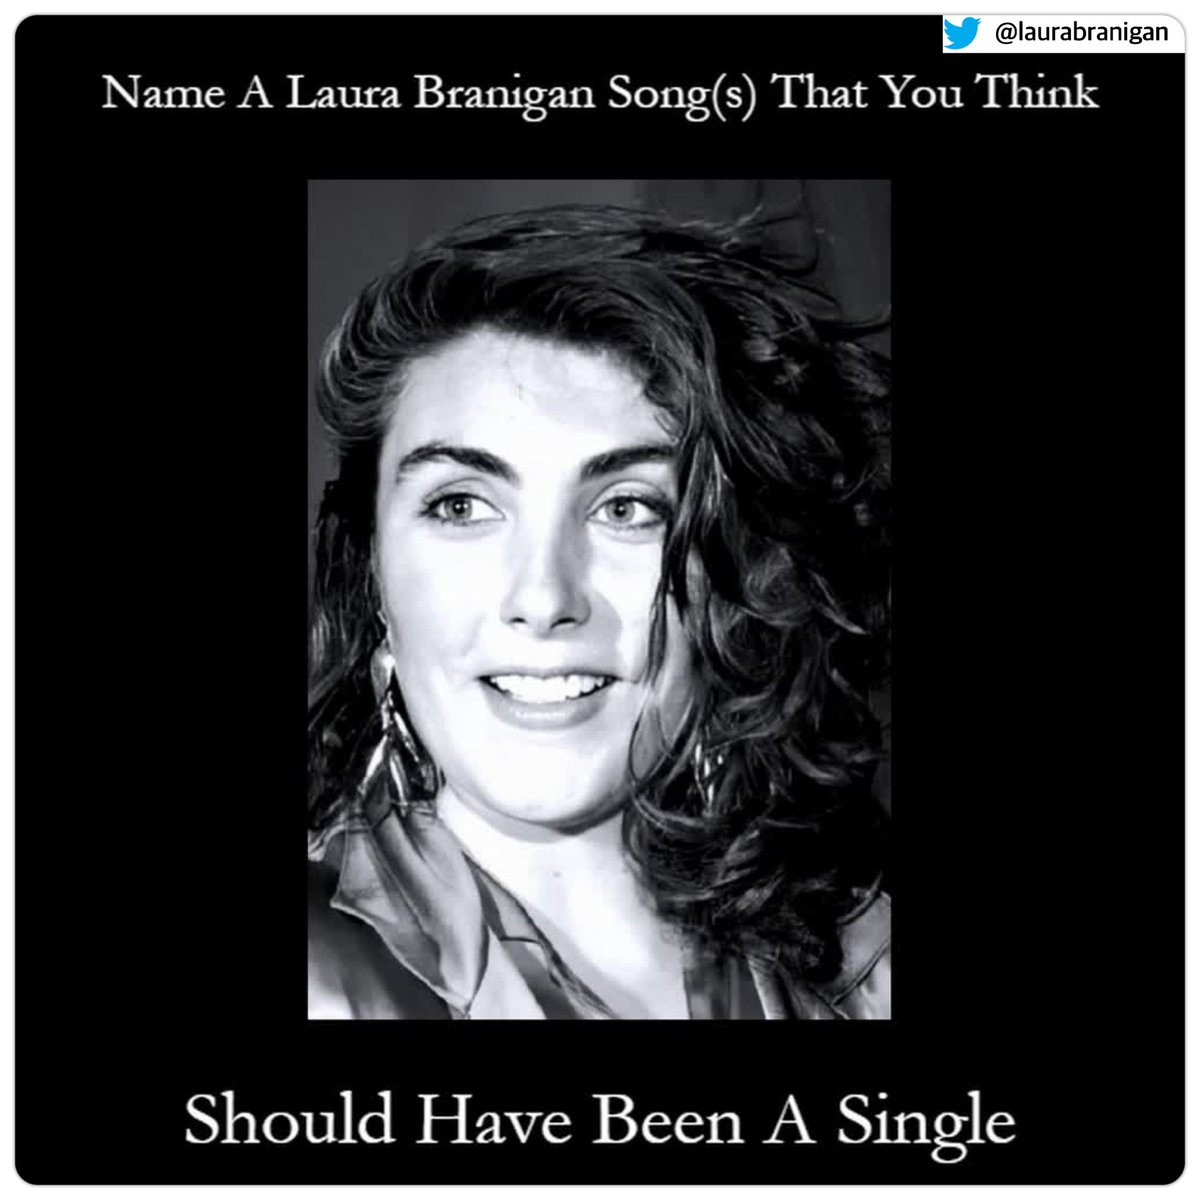 #LauraBraniganFans #TellUsWhatYouThink - The discussion point is…Name a Laura Branigan song(s) that you think should have been a single…& GO!🙂 ~ Kathy Golik, Legacy Manager 

#LauraBranigan #Songs #Single #Pop #ThoughtProvoking #LauraBraniganLegacy #TheVoiceThePassionThePower